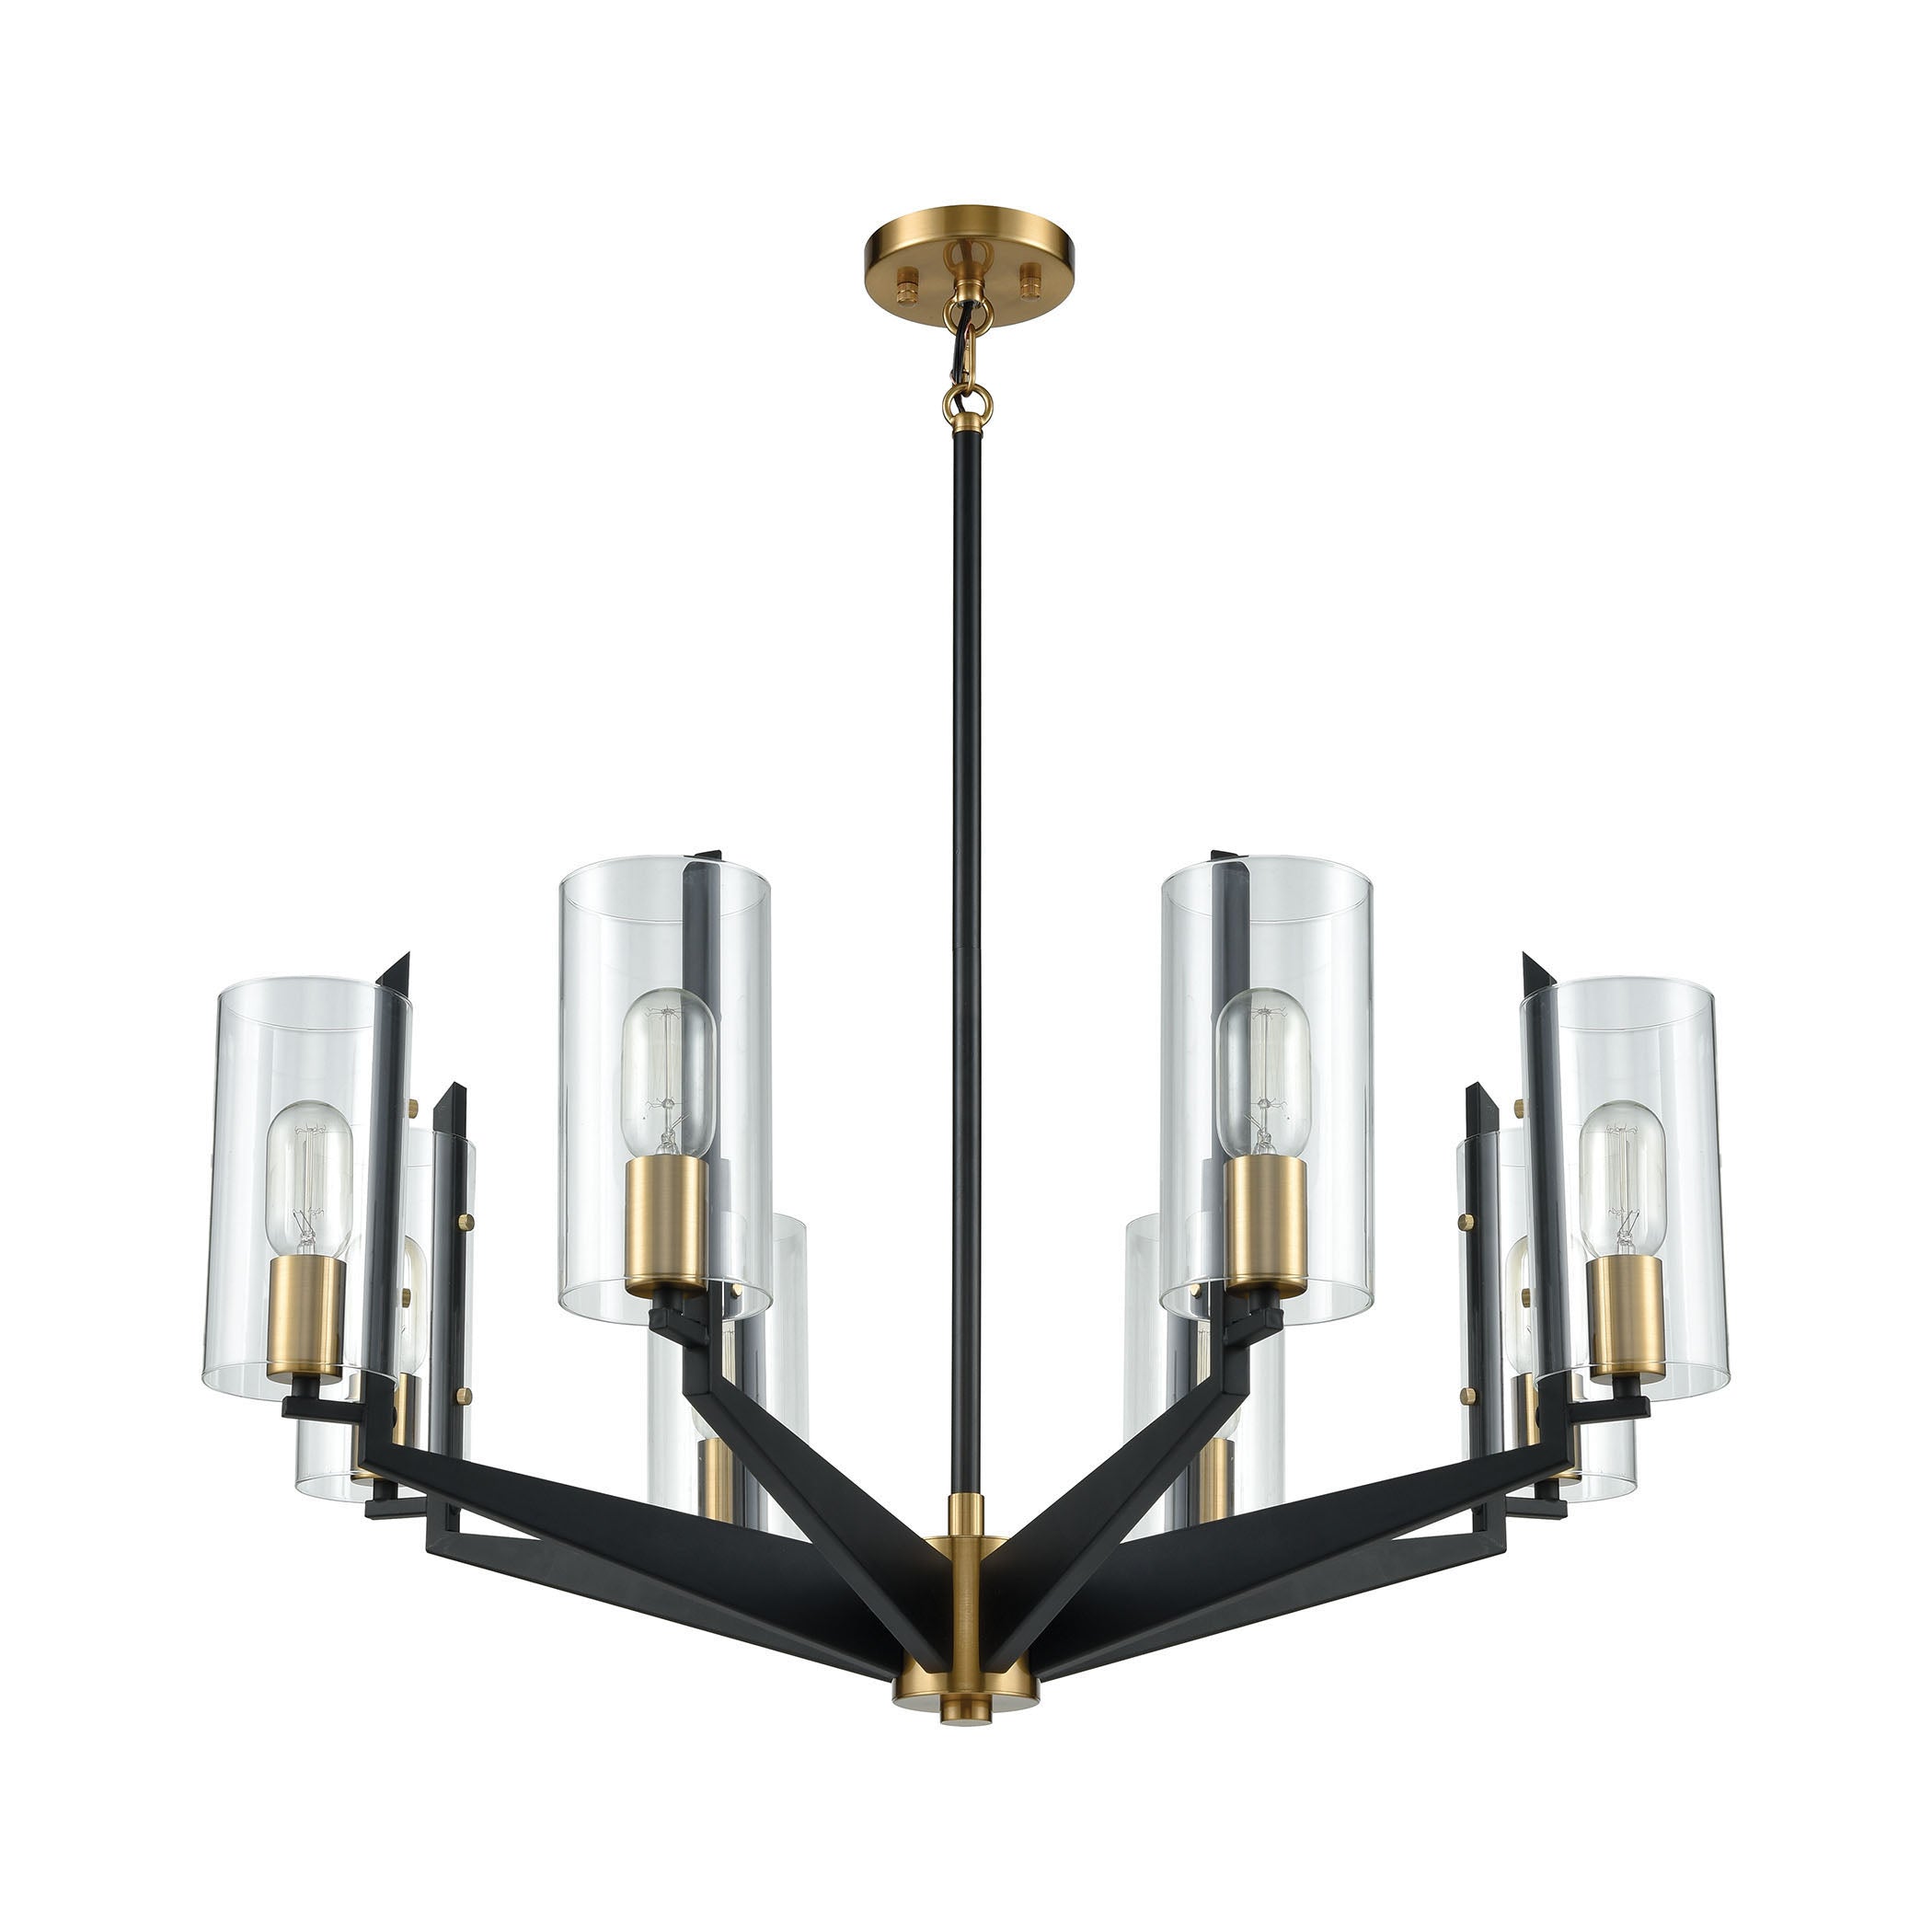 ELK Lighting 15316/8 Blakeslee 8-Light Chandelier in Matte Black and Satin Brass with Clear Glass